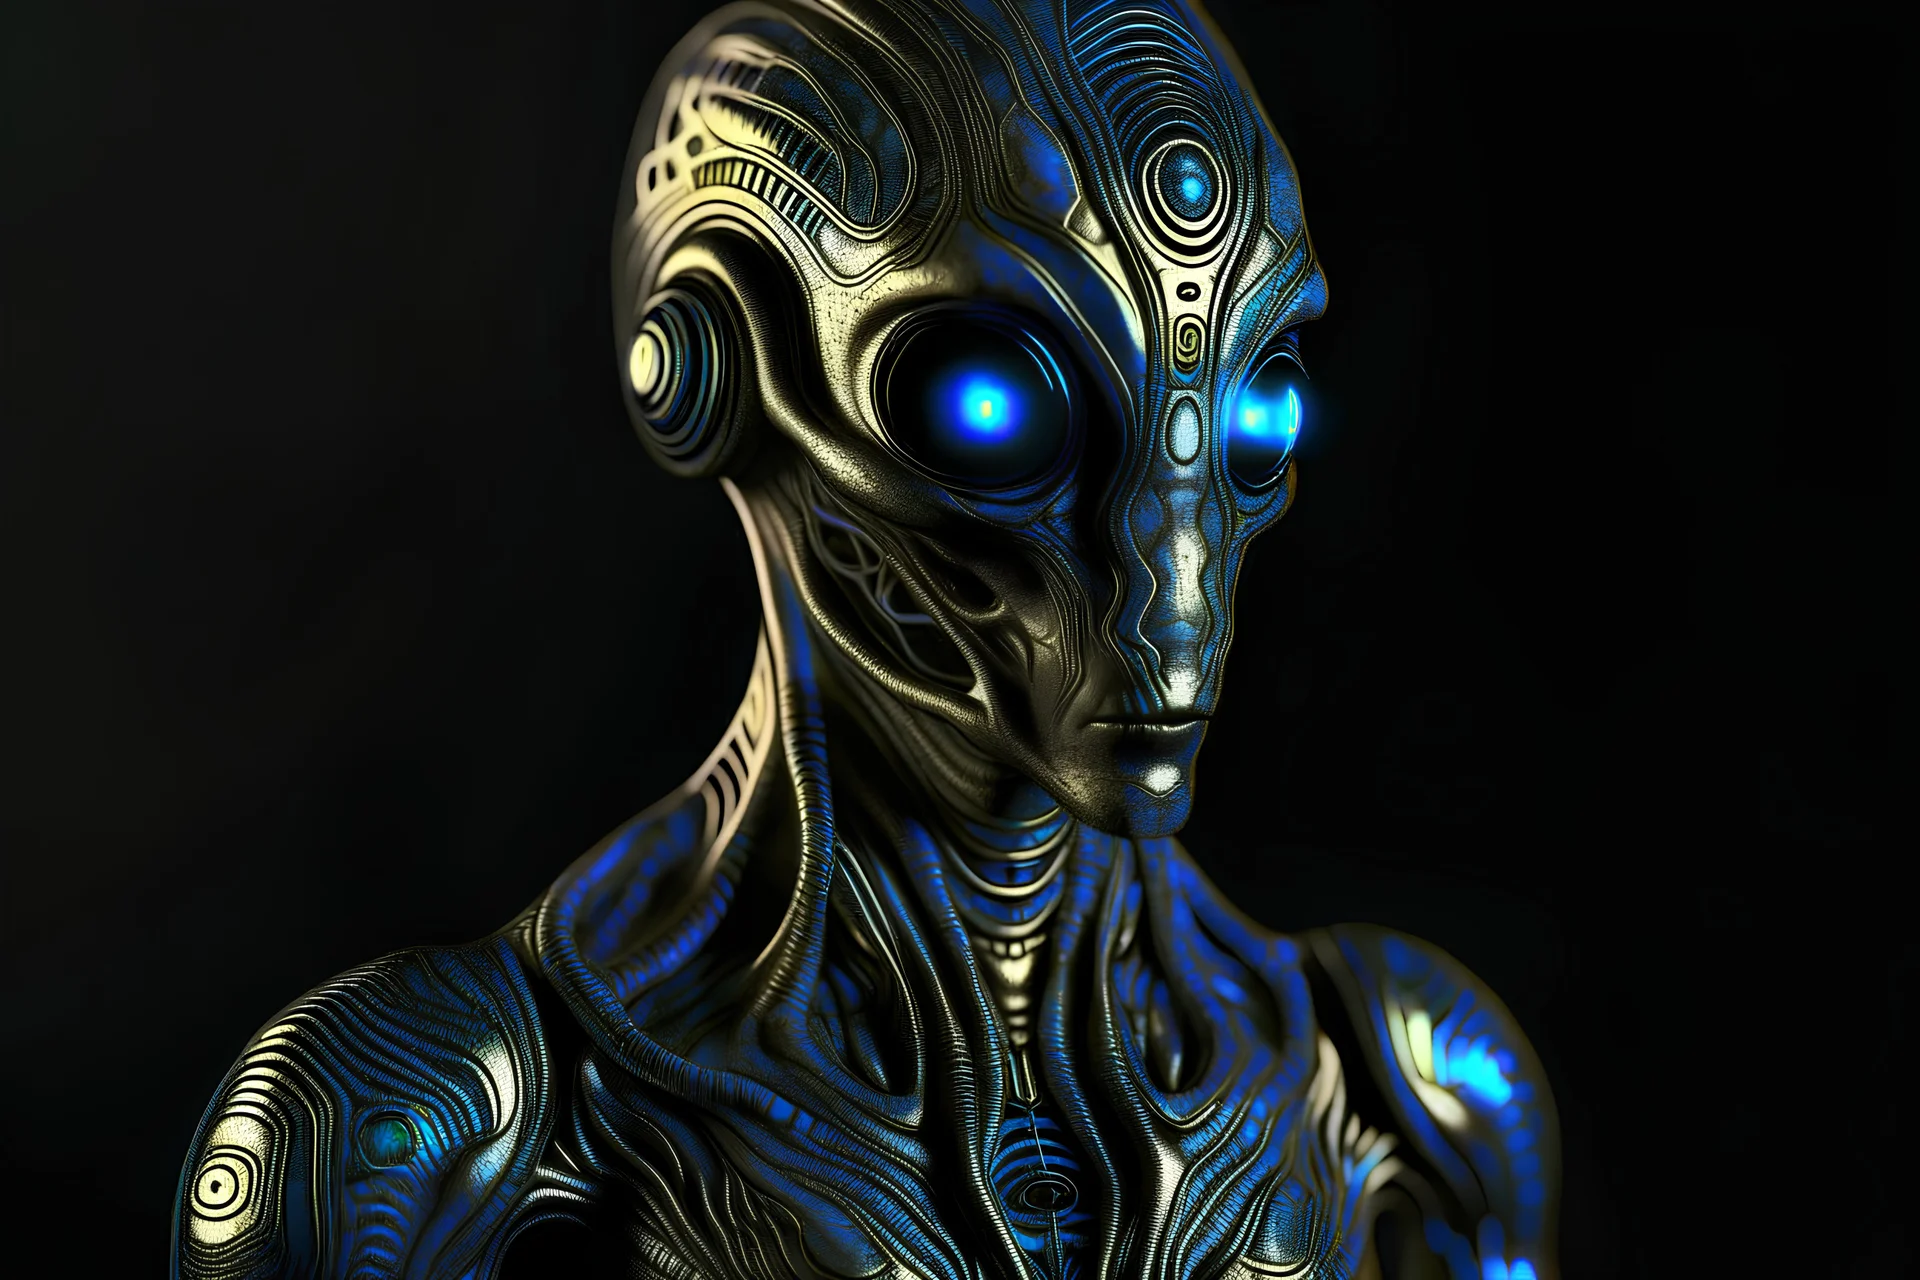 alien race, with metallic, intricately patterned skin resembling a live circuit board. His eyes glow with a soft blue light, and he's often seen in a jumpsuit covered in oil stains. toaster